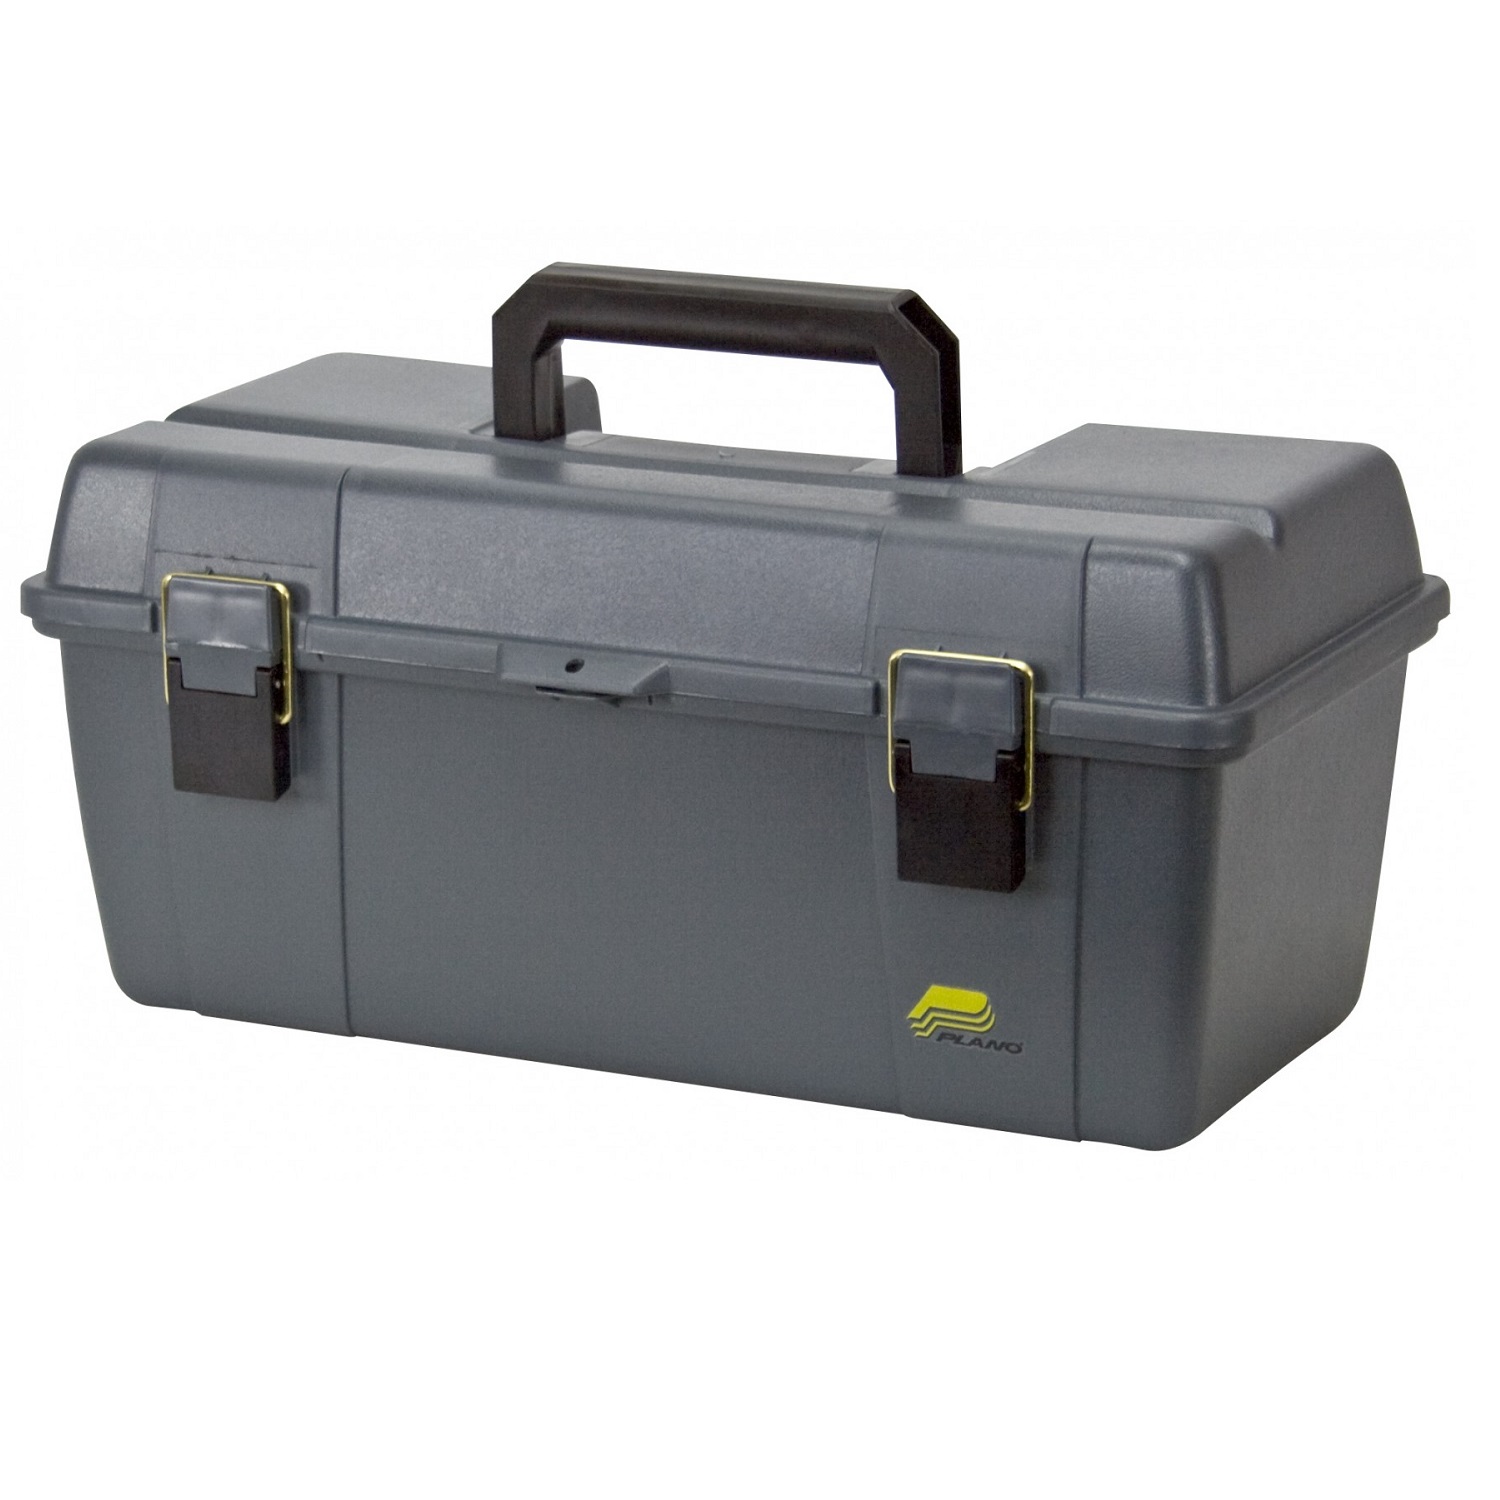 Plano 20 inch Tool Box with Lift-Out Tray  Gray